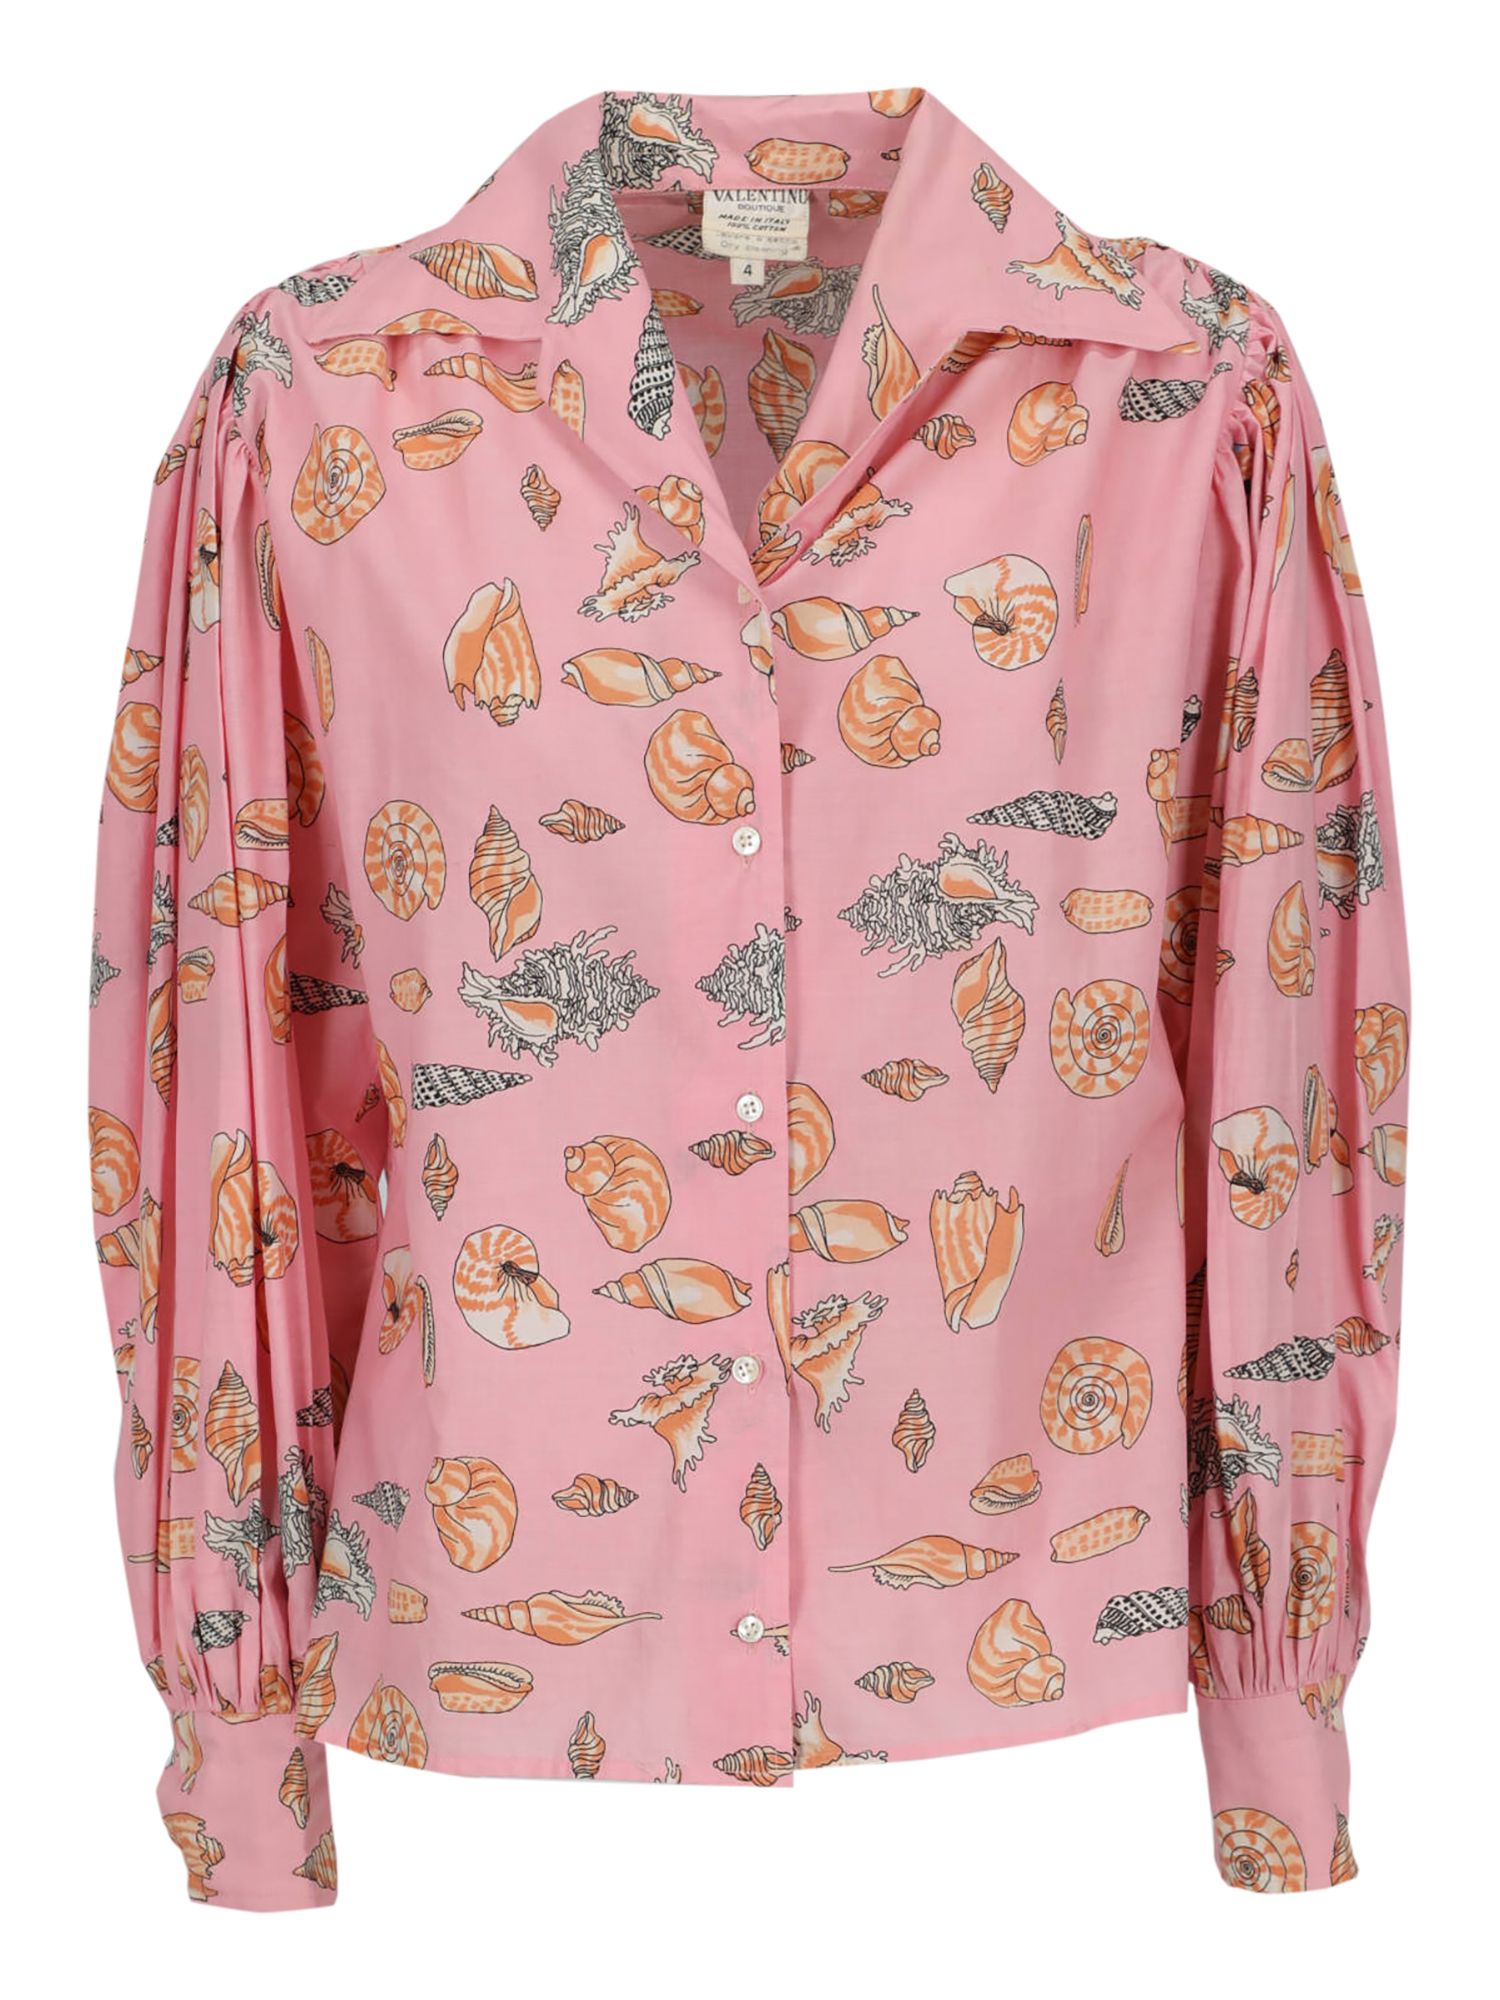 Condition: Good, Other Patterns Cotton, Color: Pink - S - US 4 -